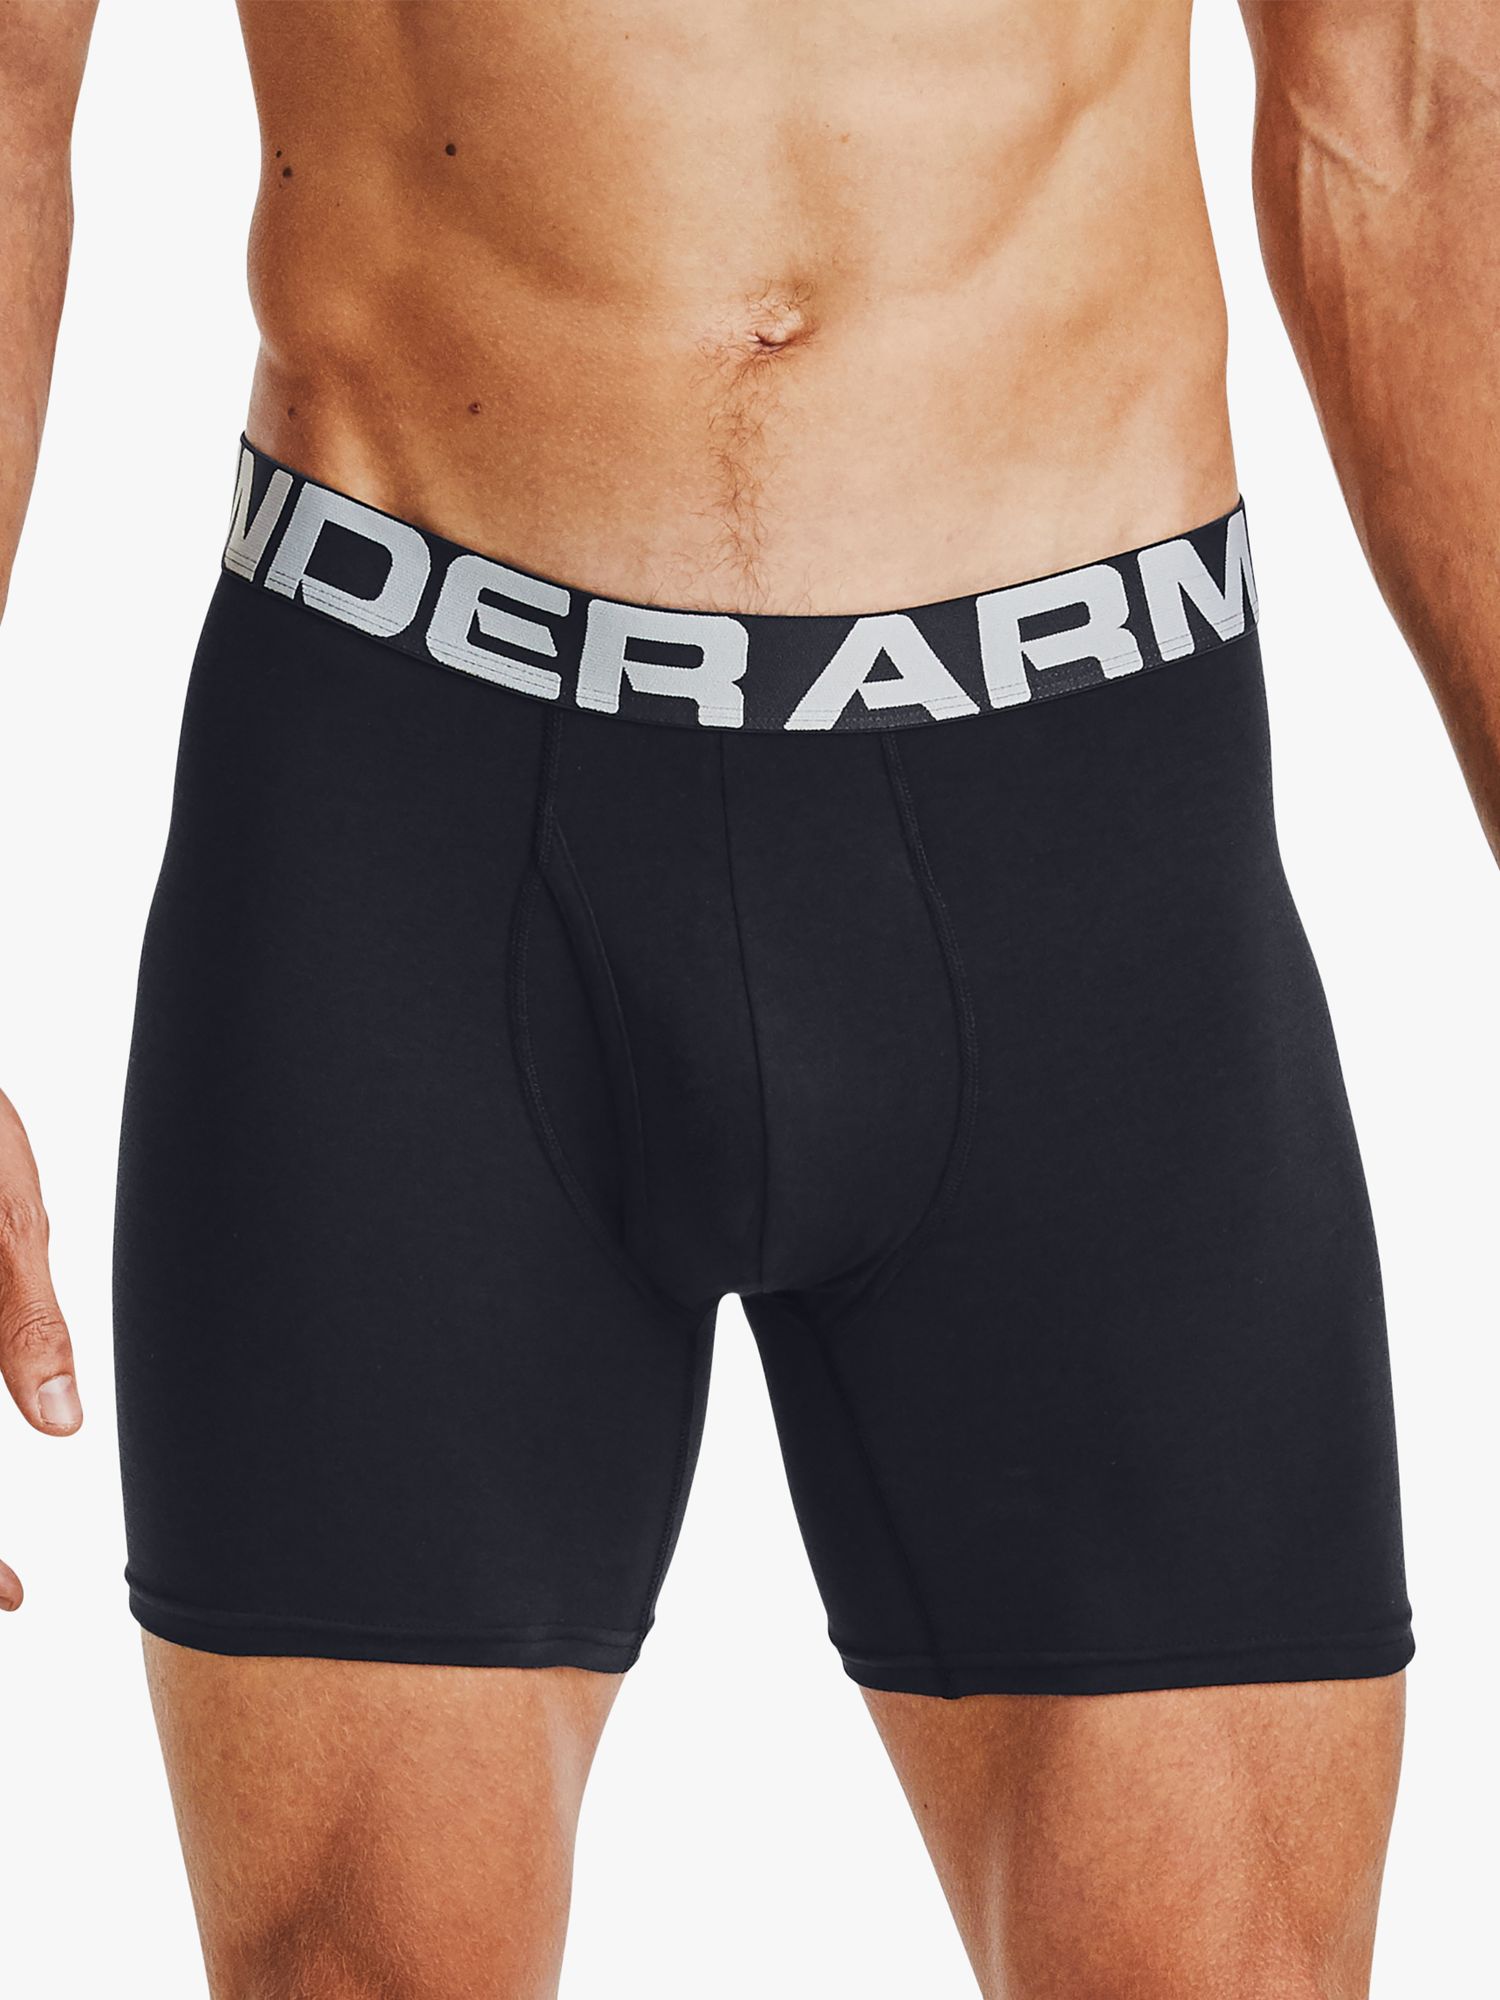 Buy Under Armour Men's Charged Cotton® Boxerjock® Boxers (3 Pack